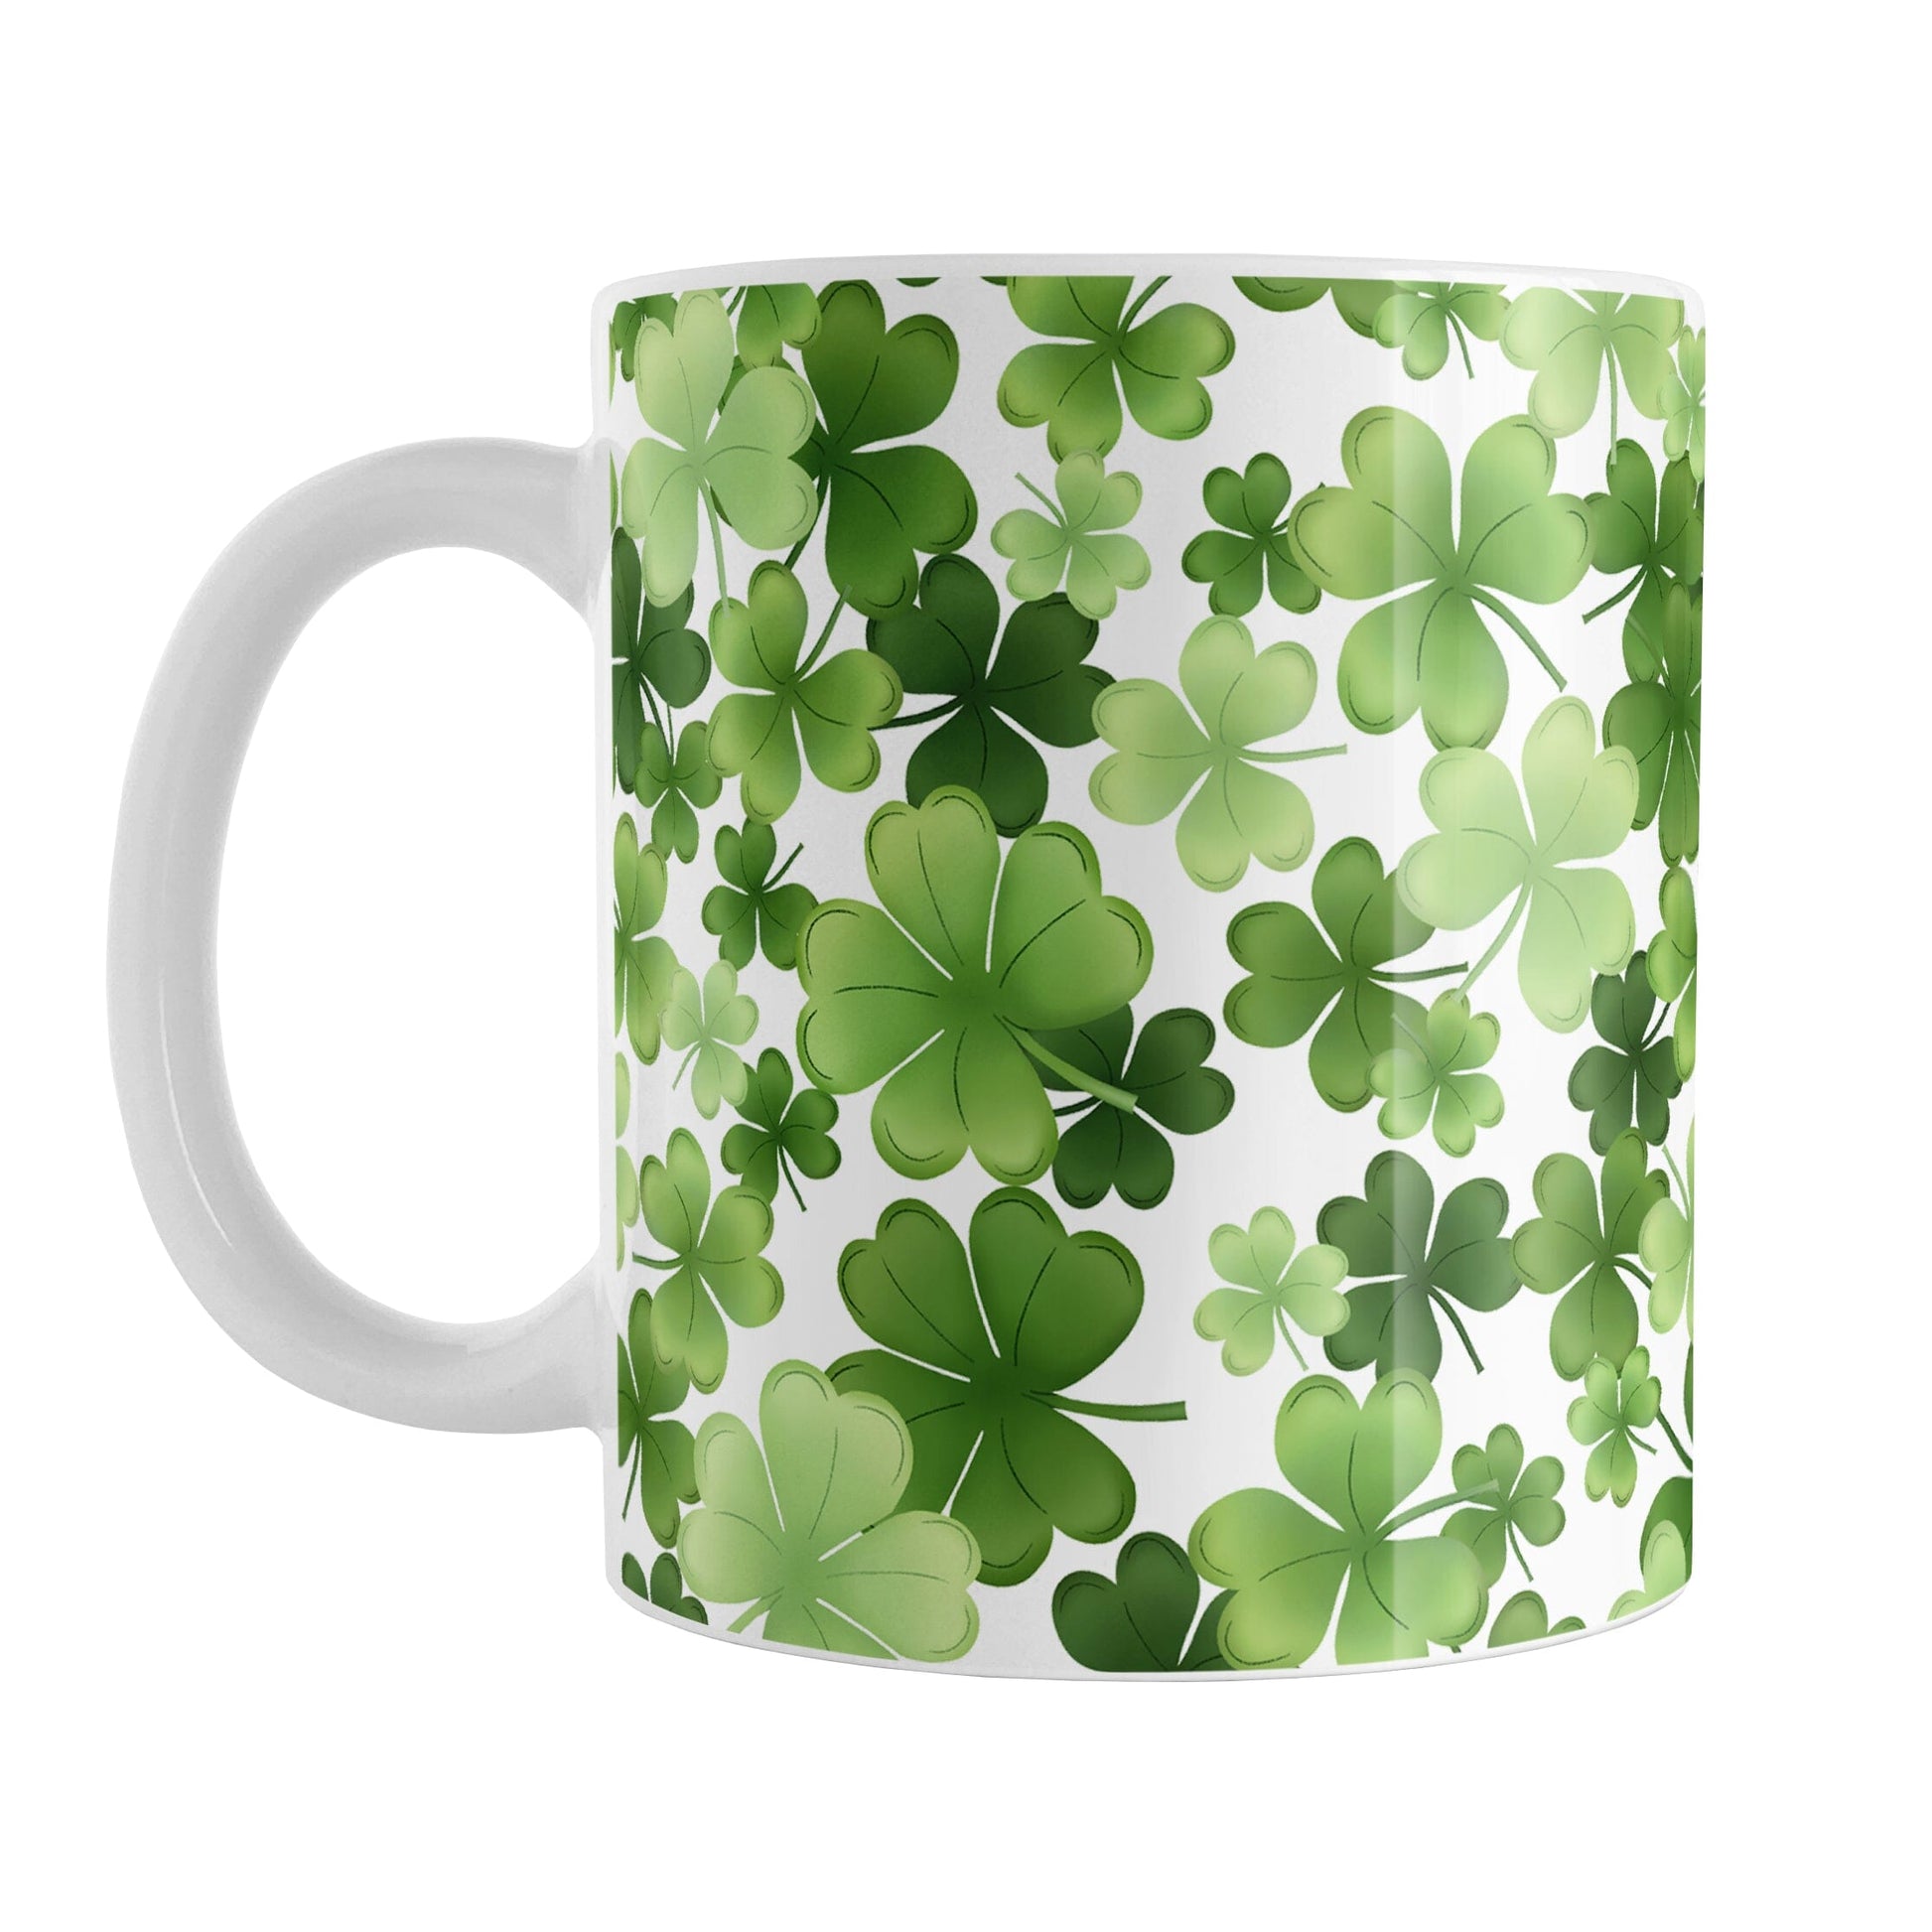 Shamrocks and 4-Leaf Clovers Mug (11oz) at Amy's Coffee Mugs. A ceramic coffee mug designed with an organic-like pattern of green shamrocks and 4-leaf clovers in different shades of green. This illustrated pattern is printed around the mug to the handle. It's perfect for anyone who loves clovers and shamrocks or wants a new mug for St. Patrick's Day.